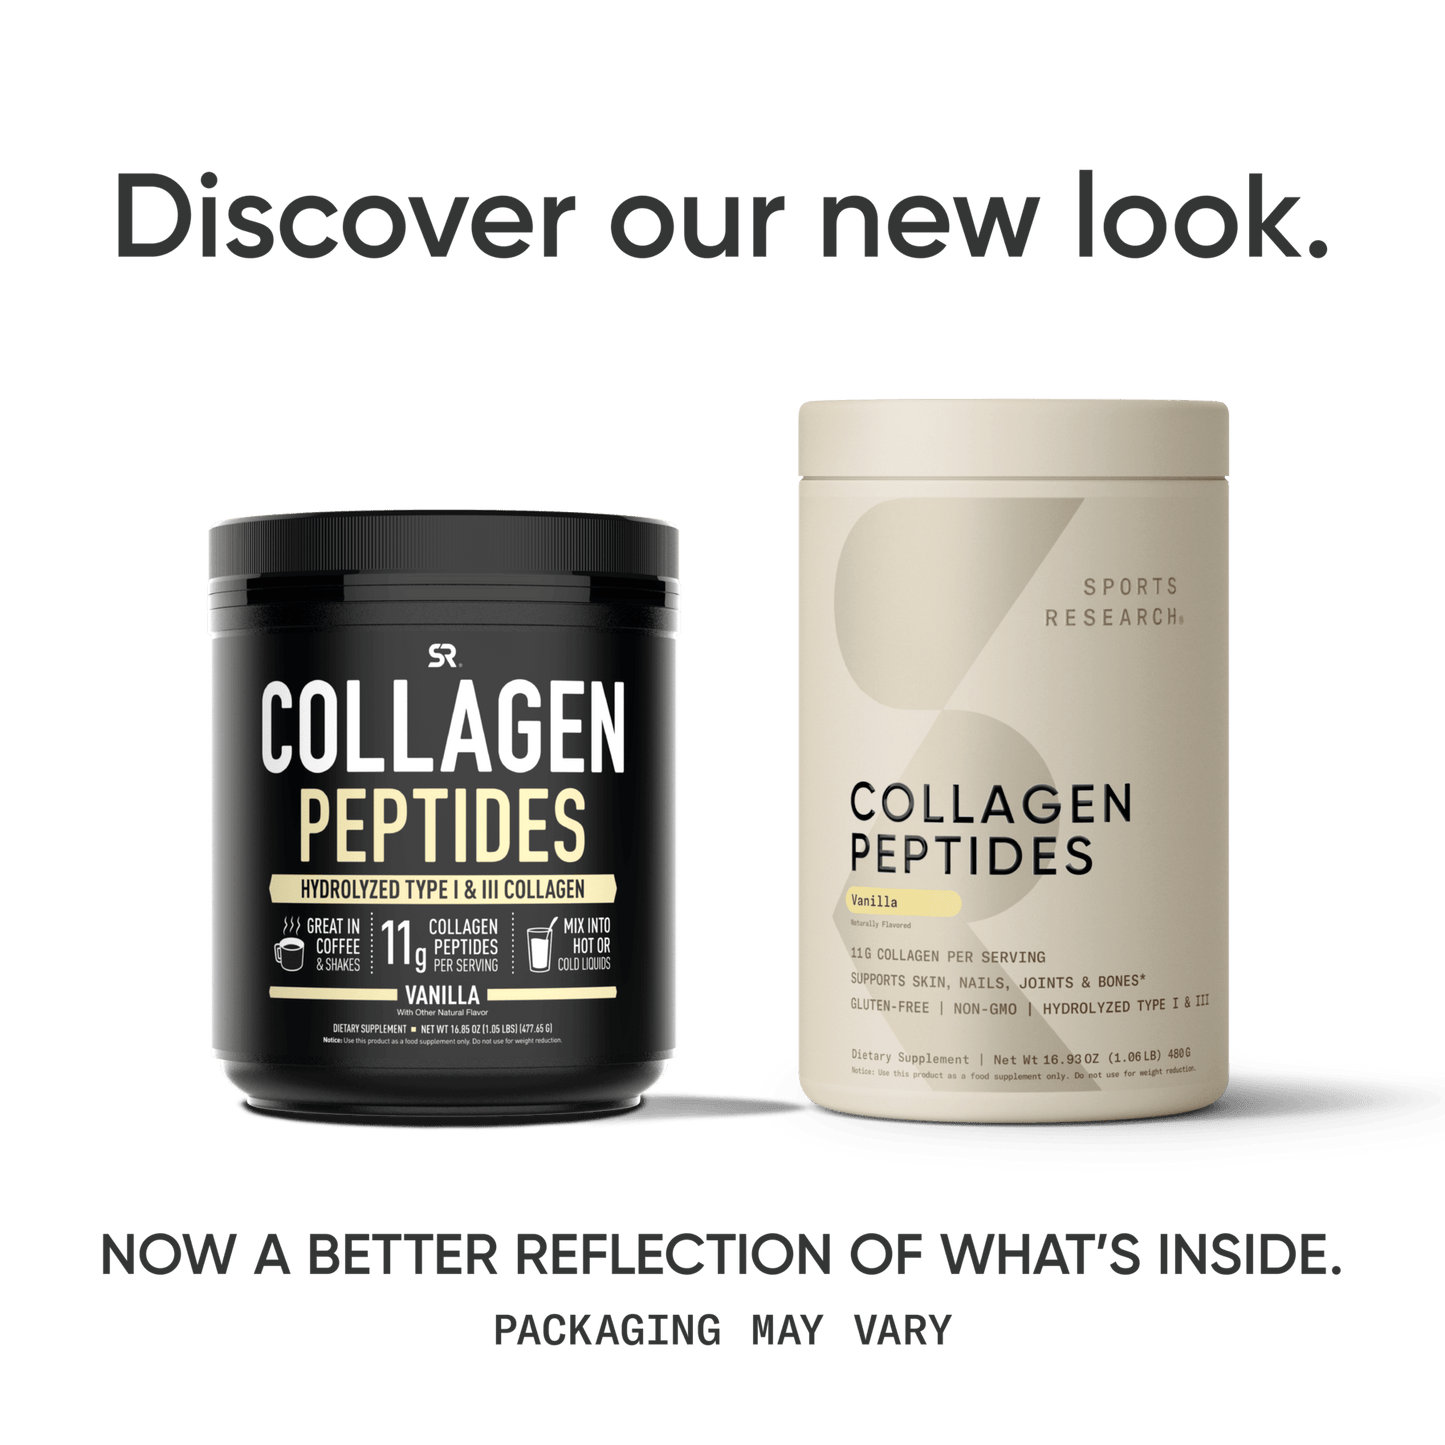 Sports Research Collagen Peptides - Flavored: now better reflection of what's inside.